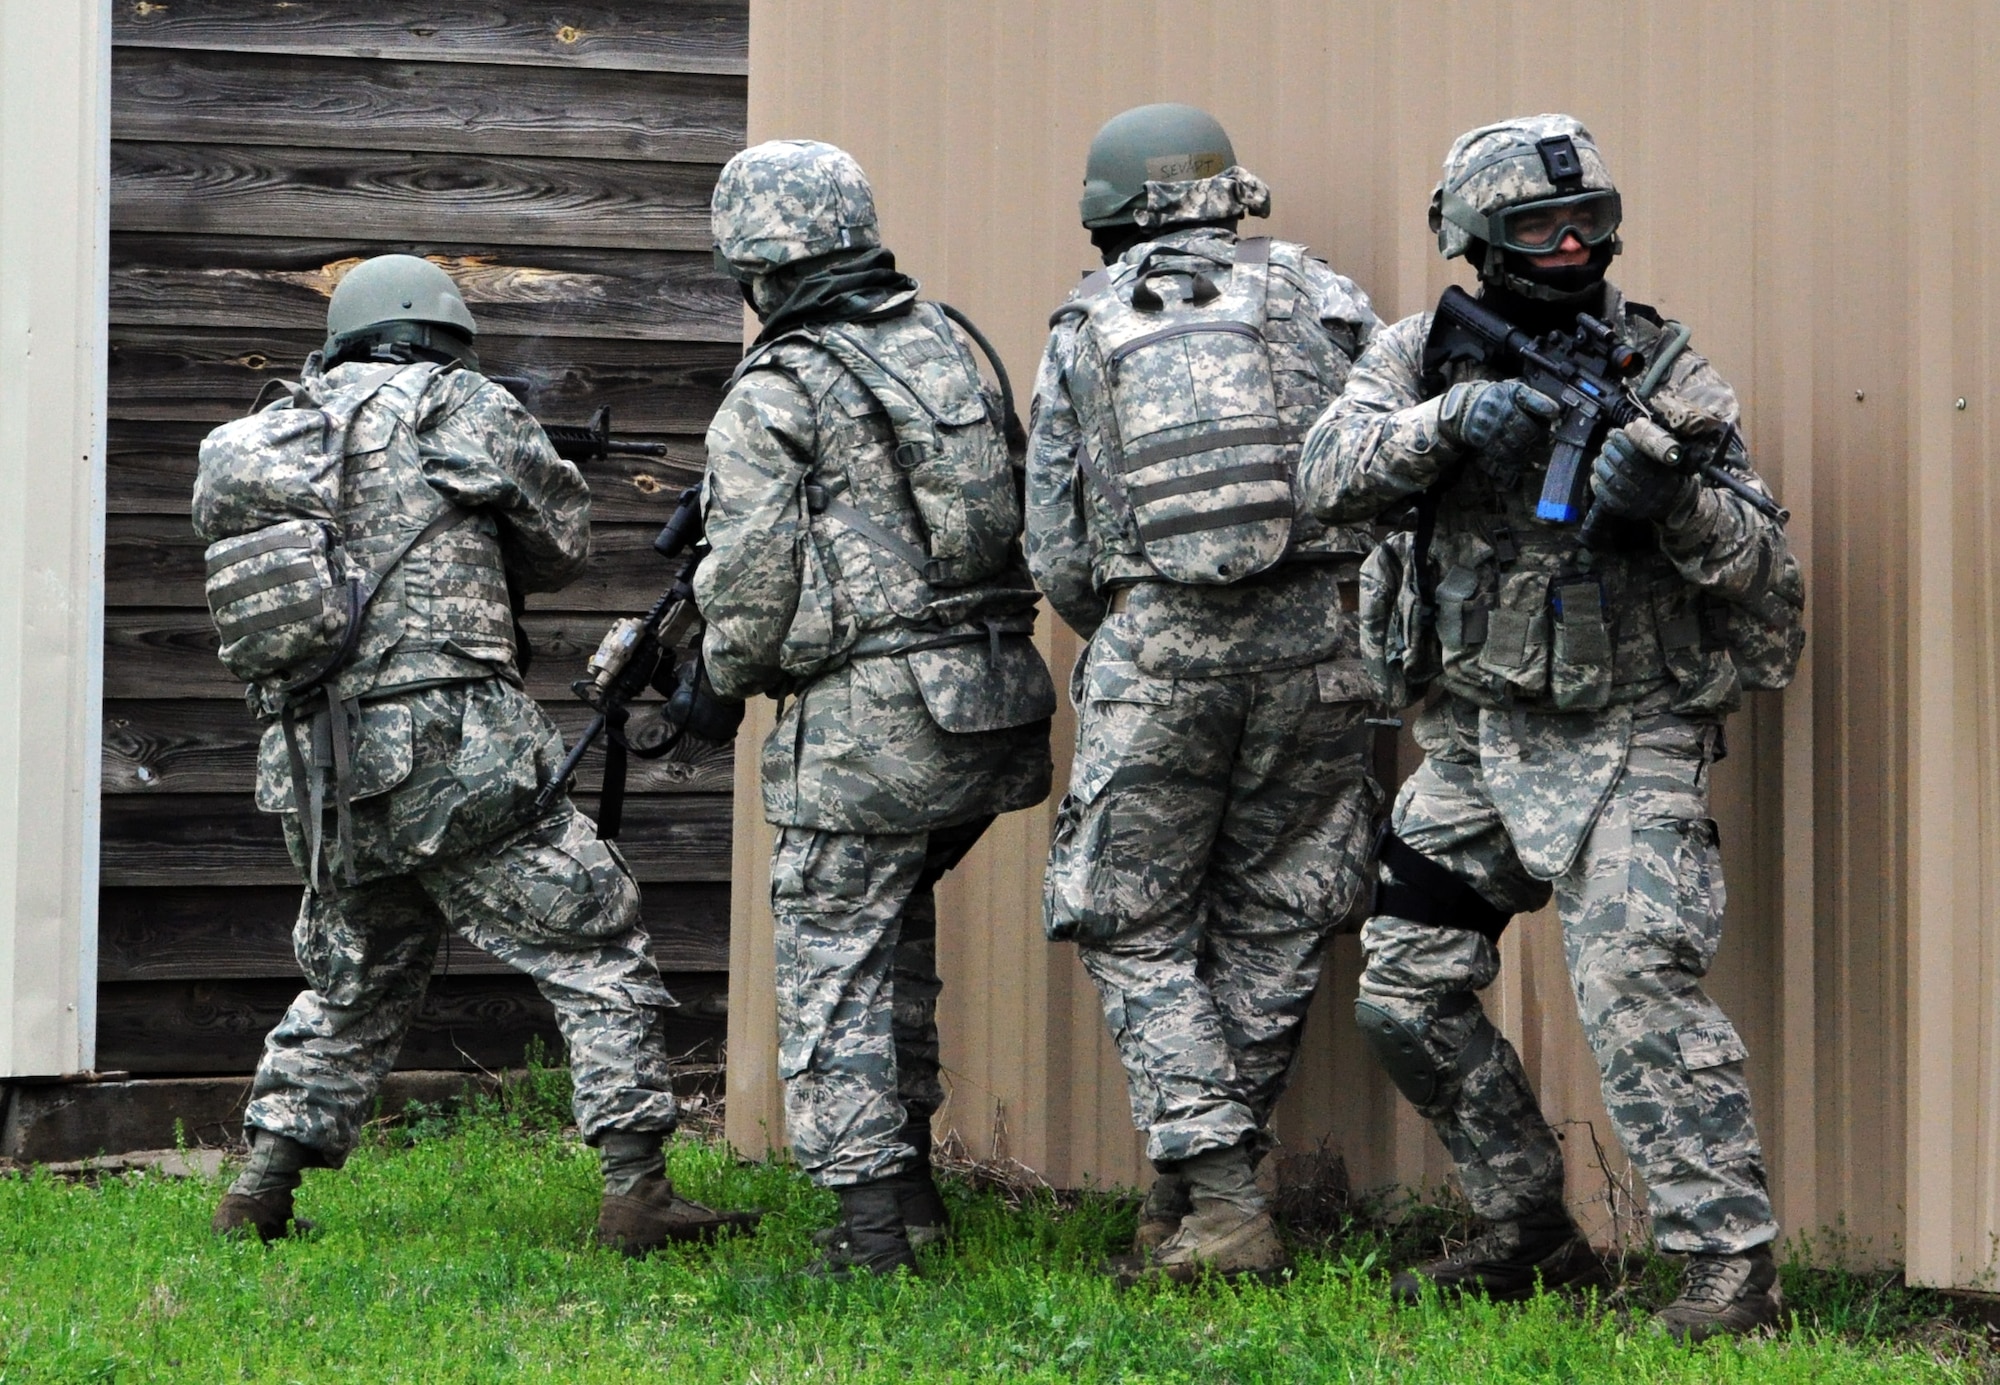 Members of the 931st Security Forces Squadron and 931st Civil Engineer Squadron perform an assault on opposing forces during a military operations on urban terrain (MOUT) exercise at Camp Gruber Training Center, Okla., April 15, 2015.  More than 80 members of the two squadrons participated in ten days of combat skills training at Camp Gruber, which included land navigation, weapons training, tactical movements, convoy operations, base defense, room clearing procedures, foot patrols, military operations on urban terrain (MOUT) and combat lifesaving.  (U.S. Air Force photo by Capt. Zach Anderson)
